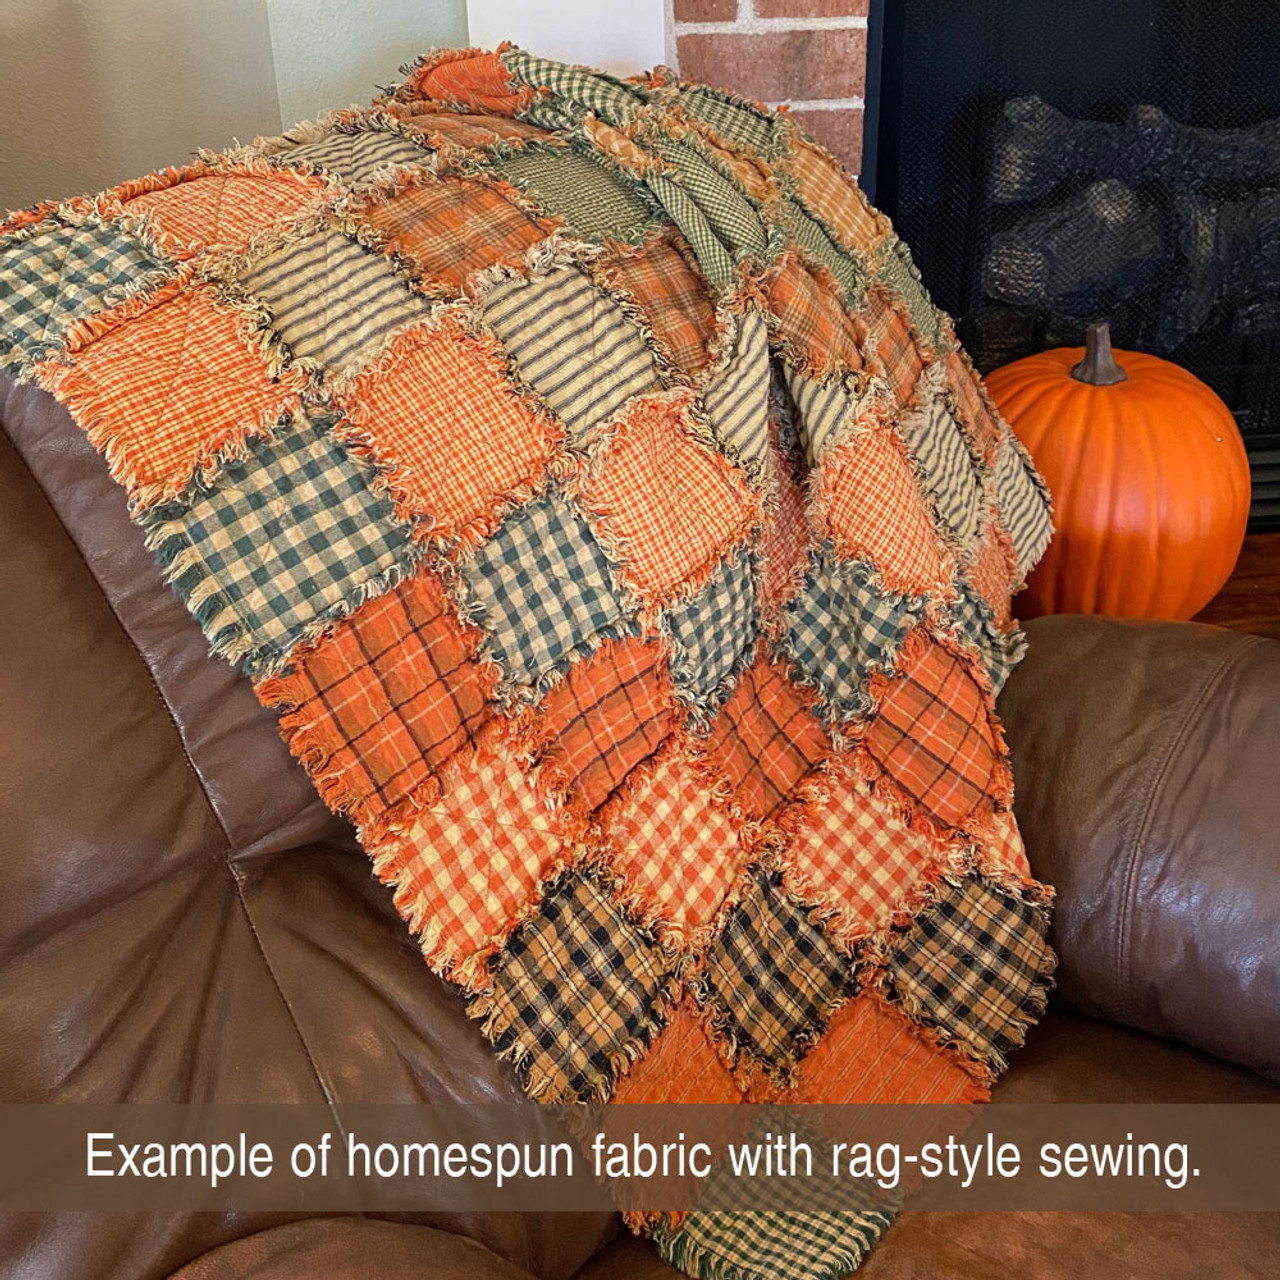 Autumn Jubilee Sewing Project – Hot Pad Gifts – From My Carolina Home